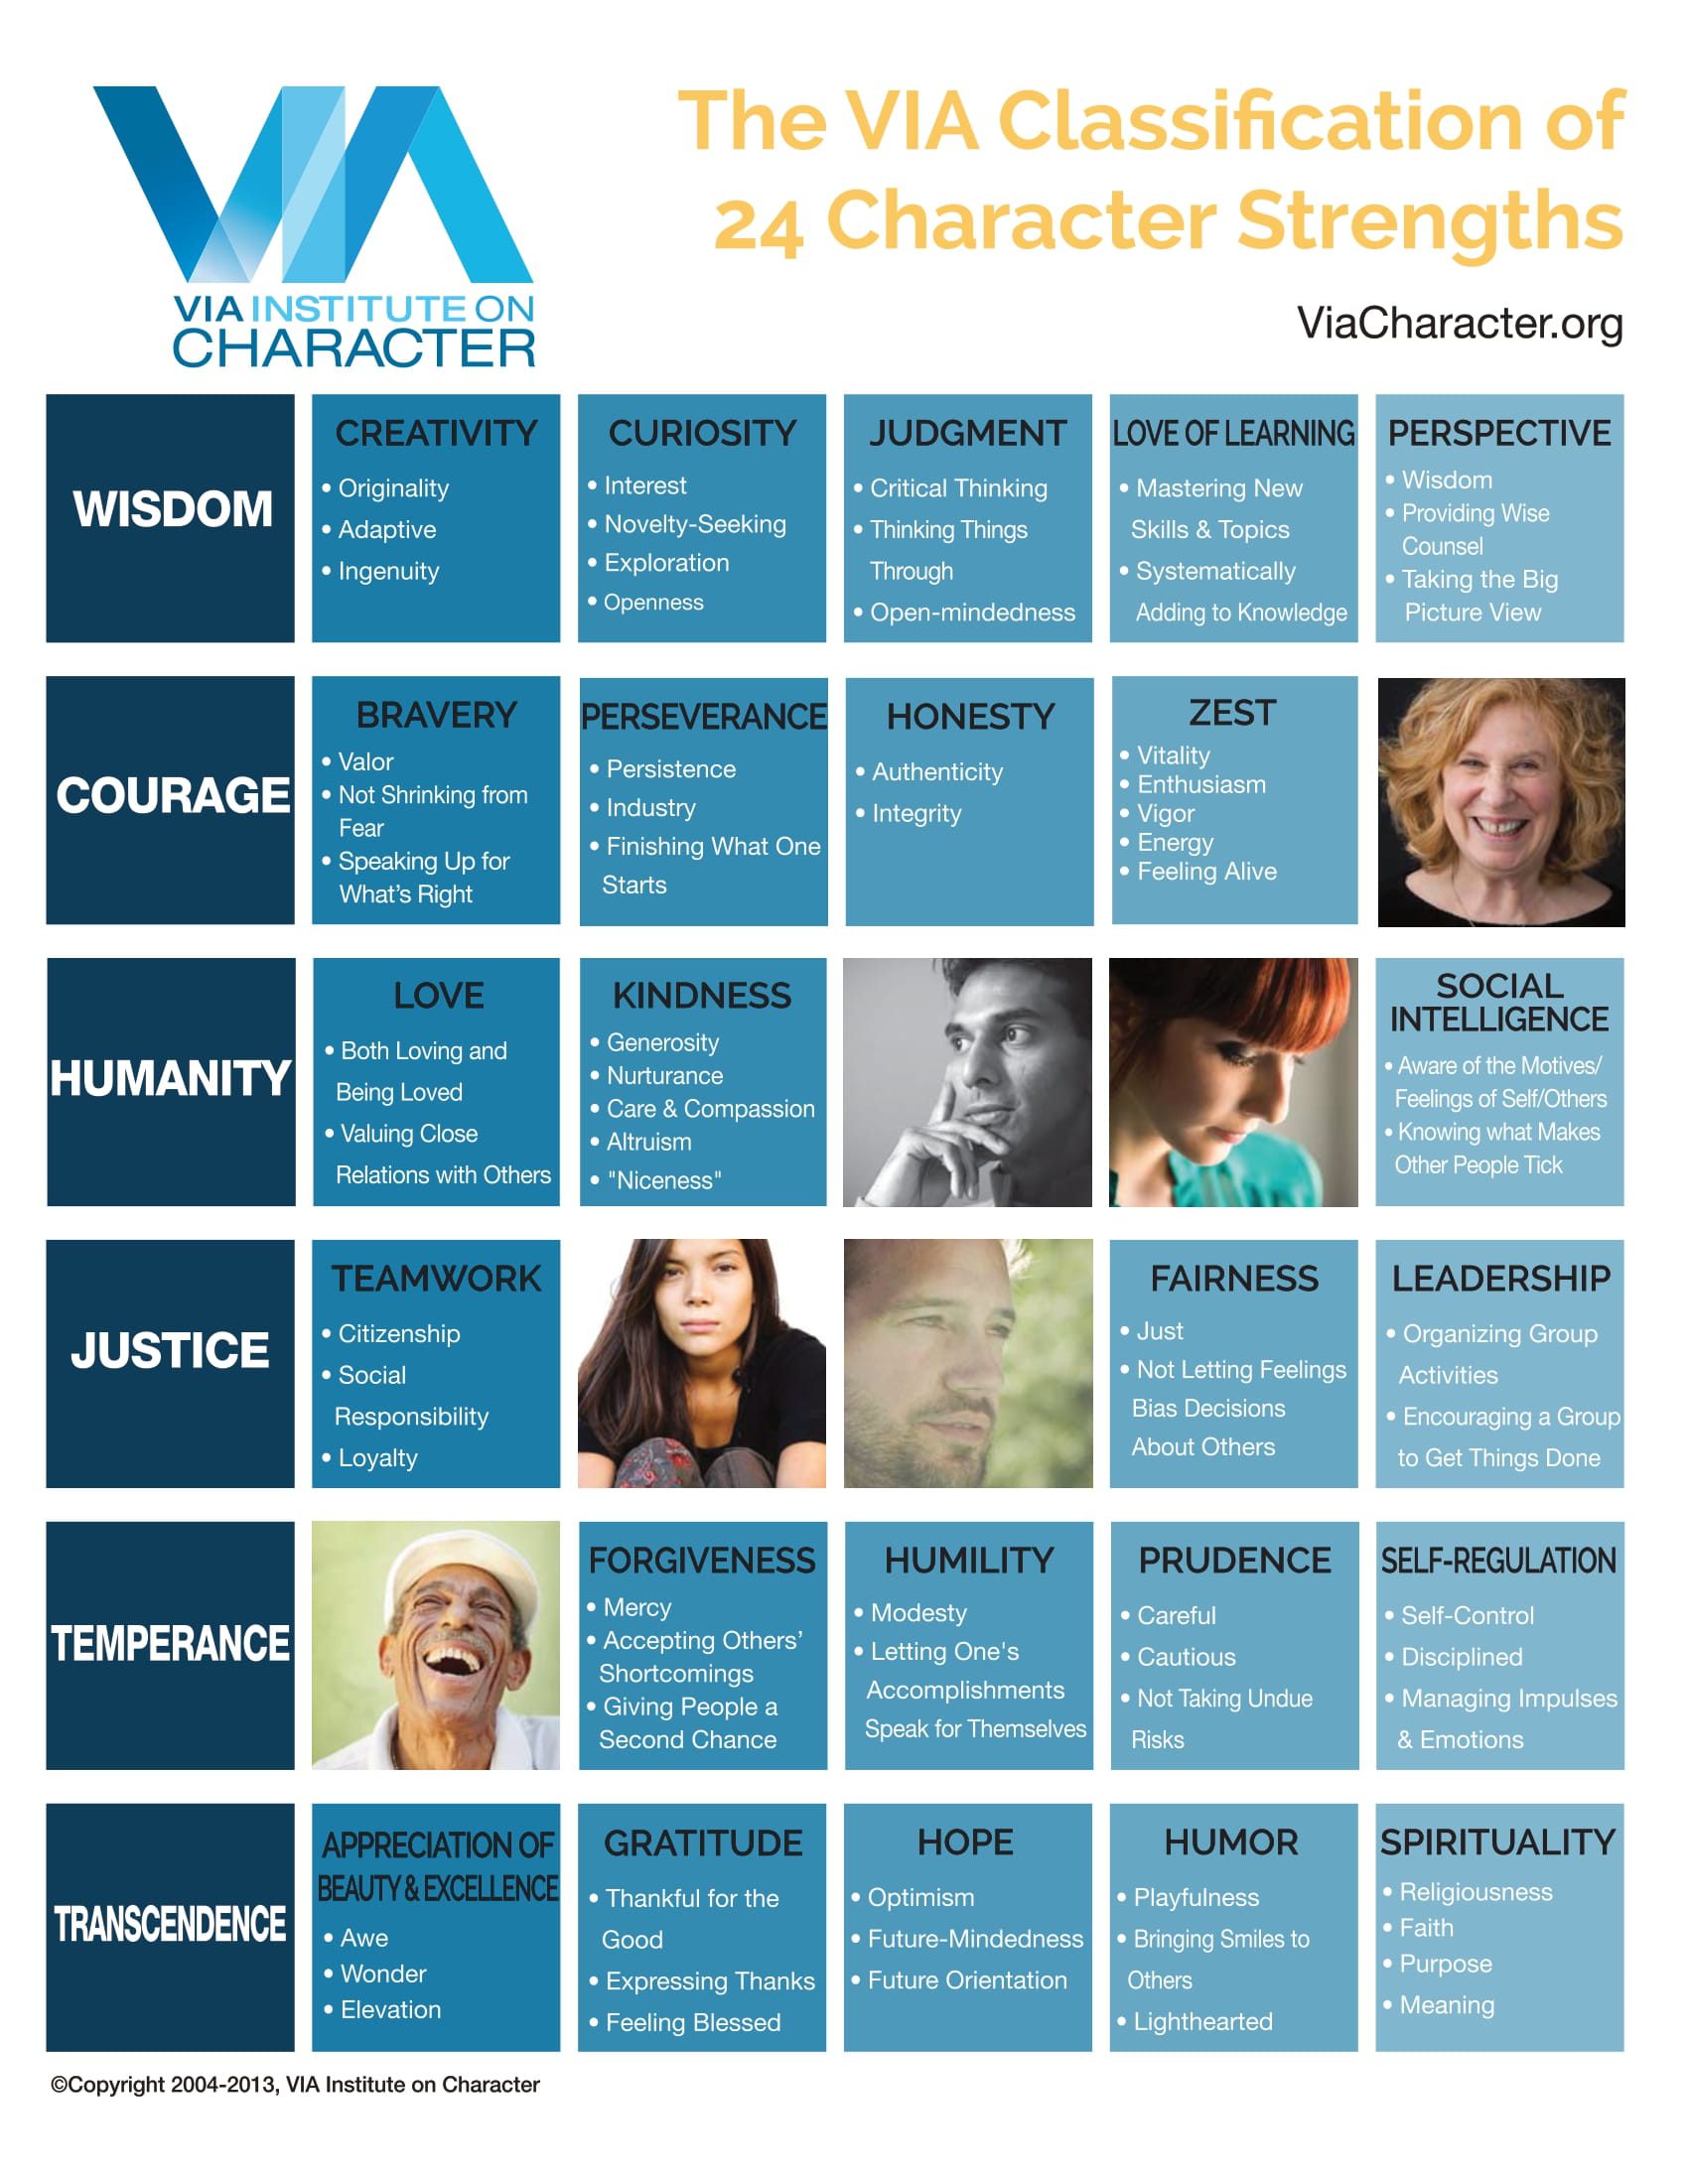 The VIA classification of 24 character strengths